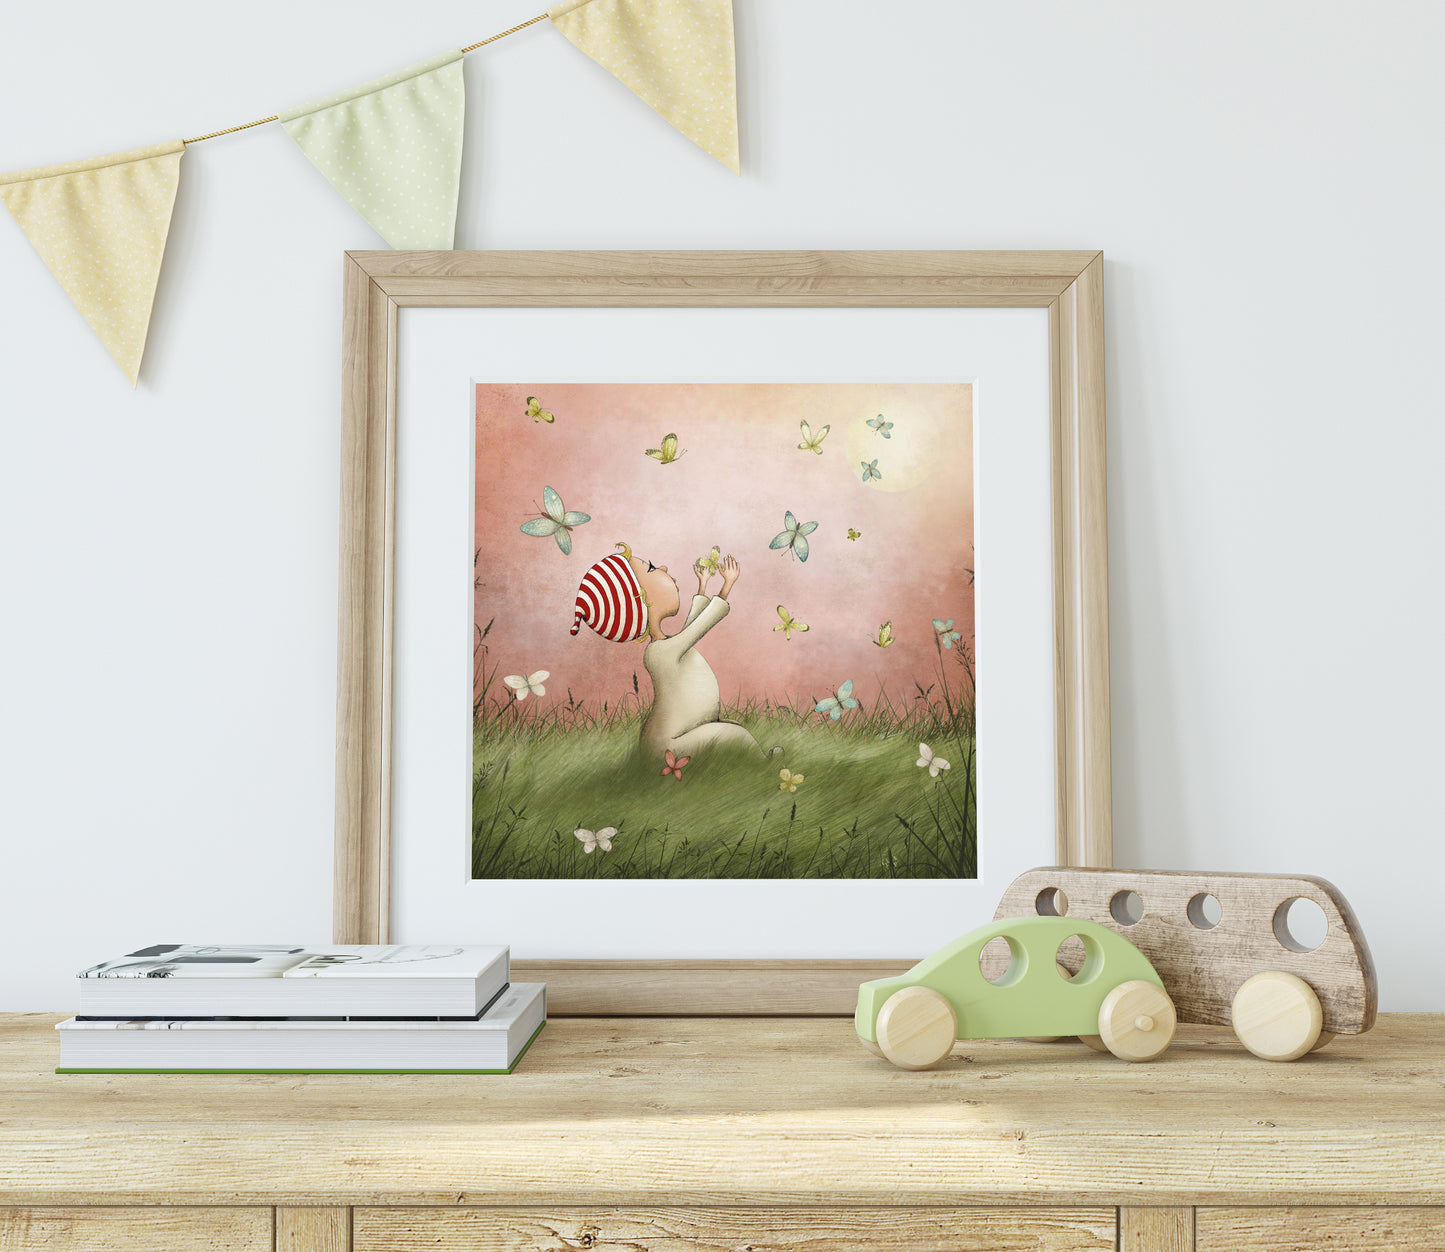 Playing with butterflies - Art print